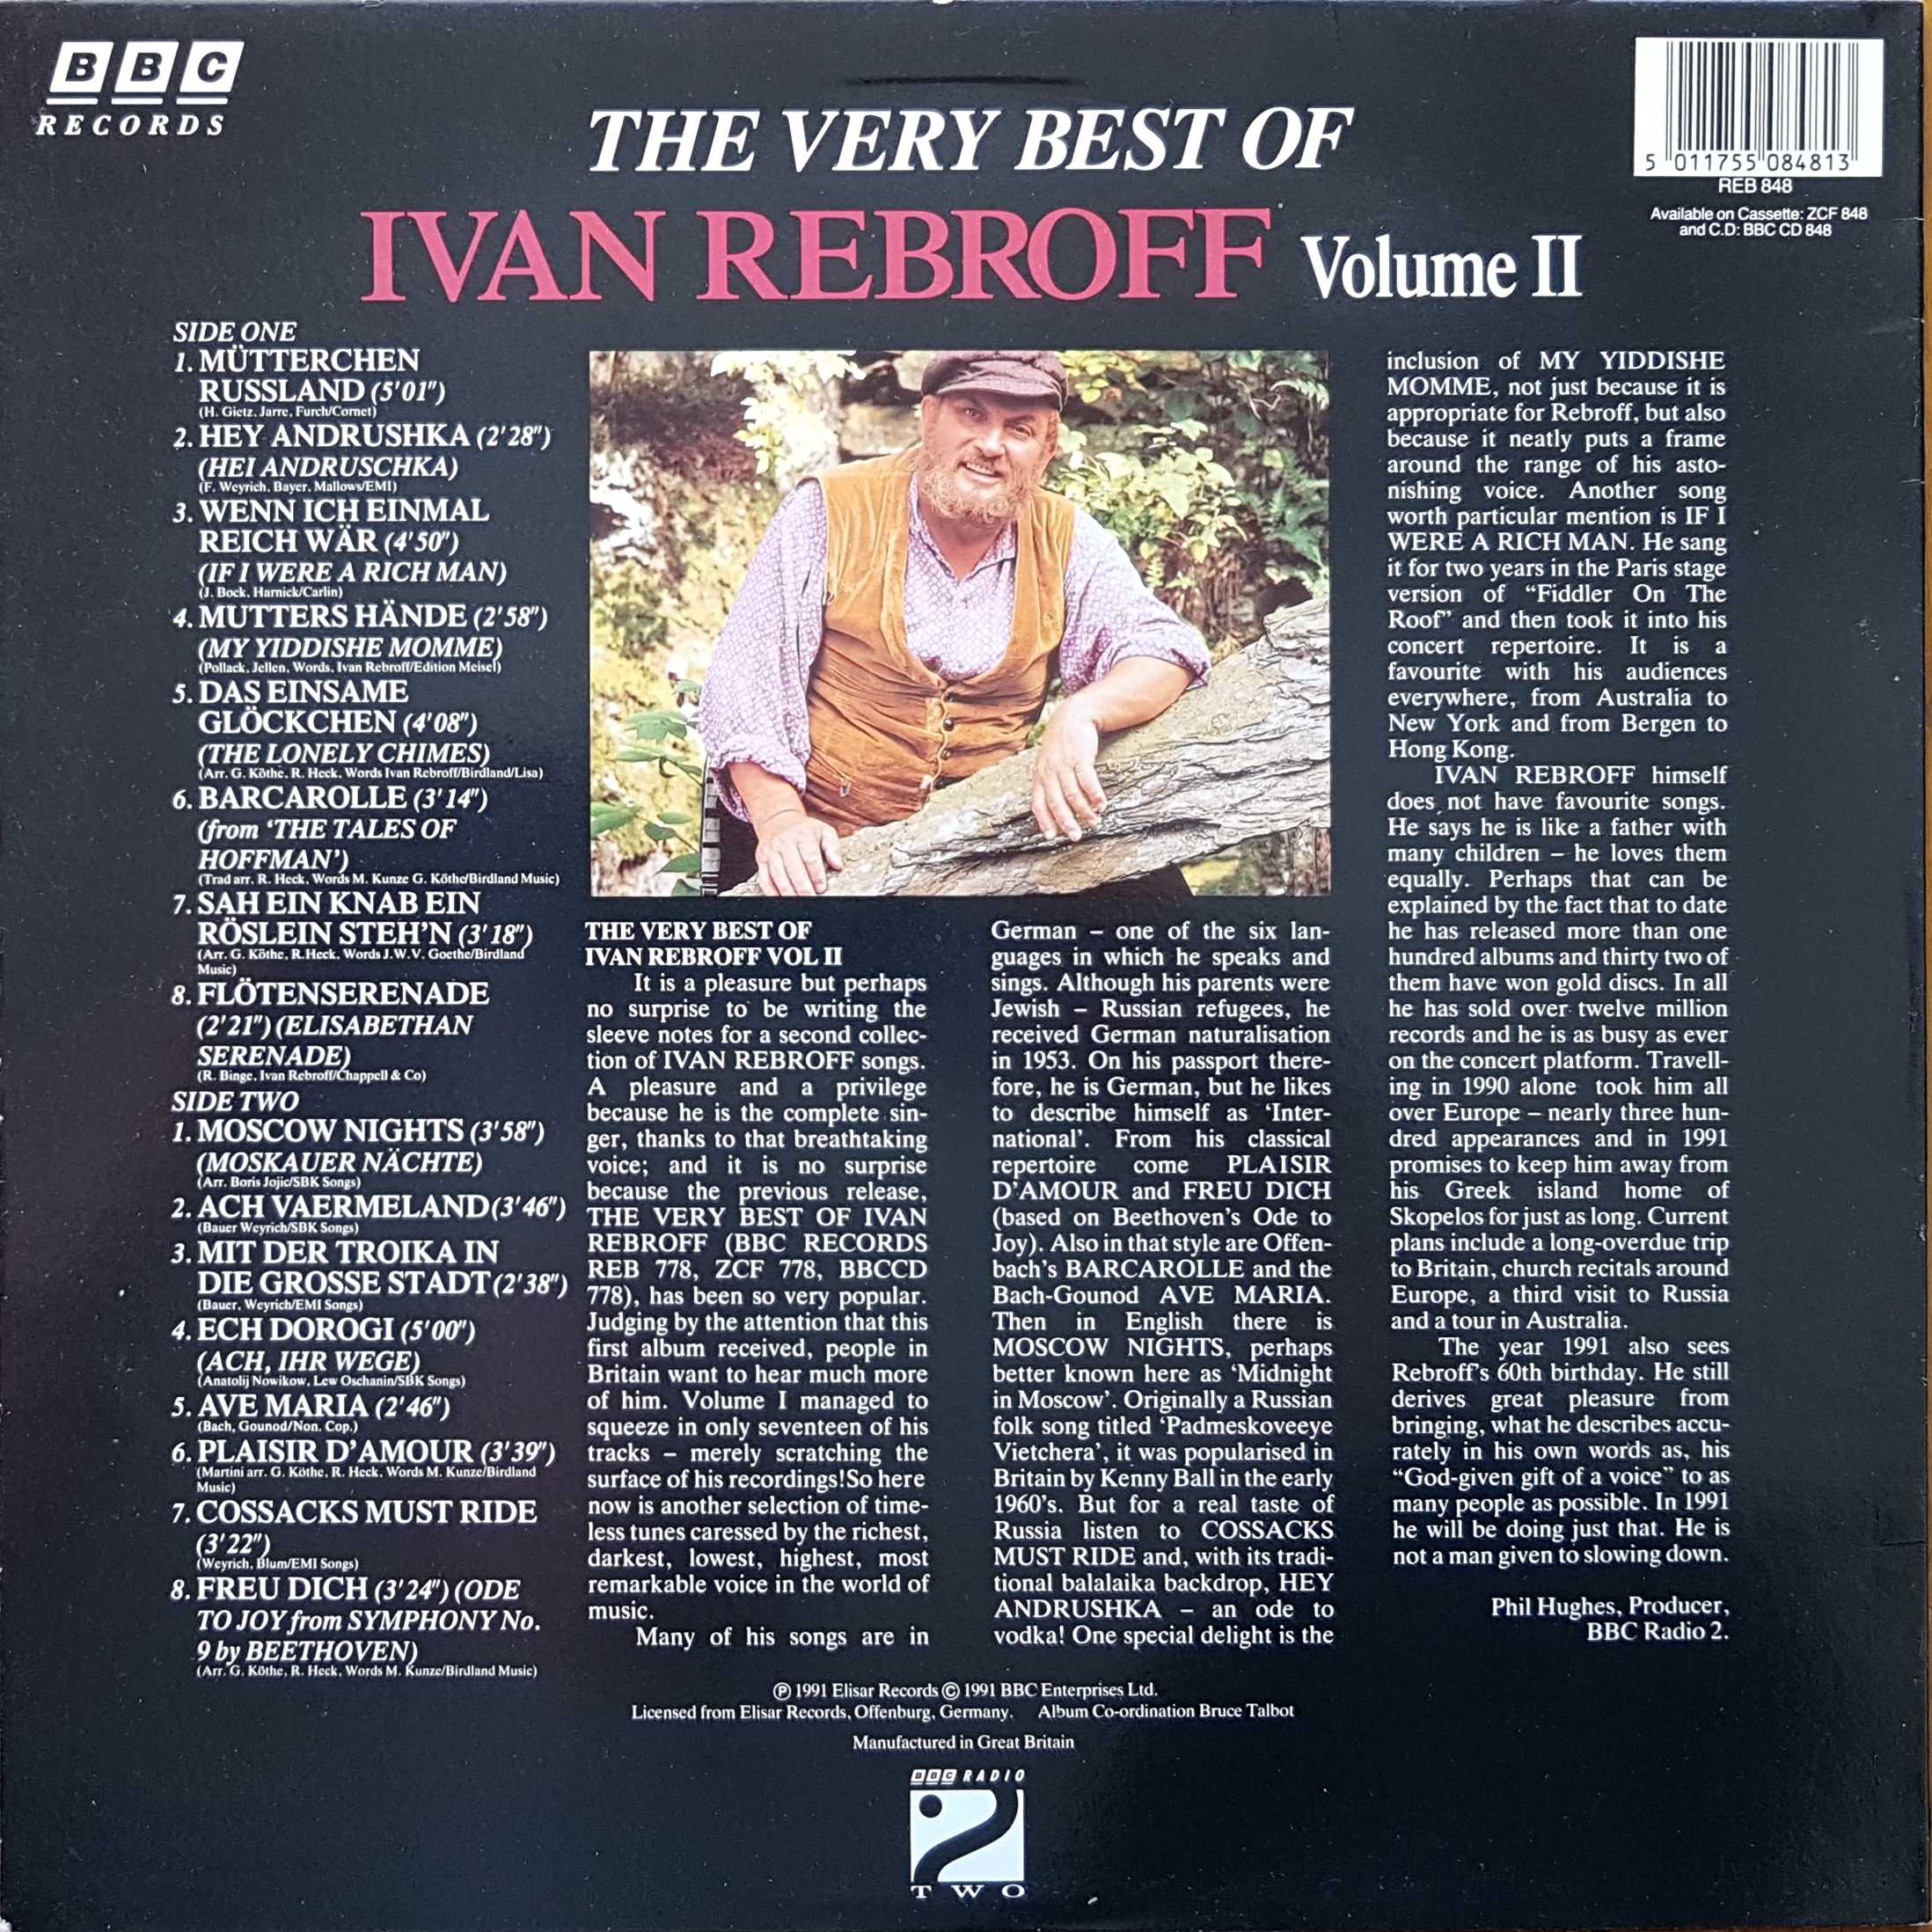 Picture of REB 848 The very best of Ivan Rebroff - Volume 2 by artist Ivan Rebroff from the BBC records and Tapes library